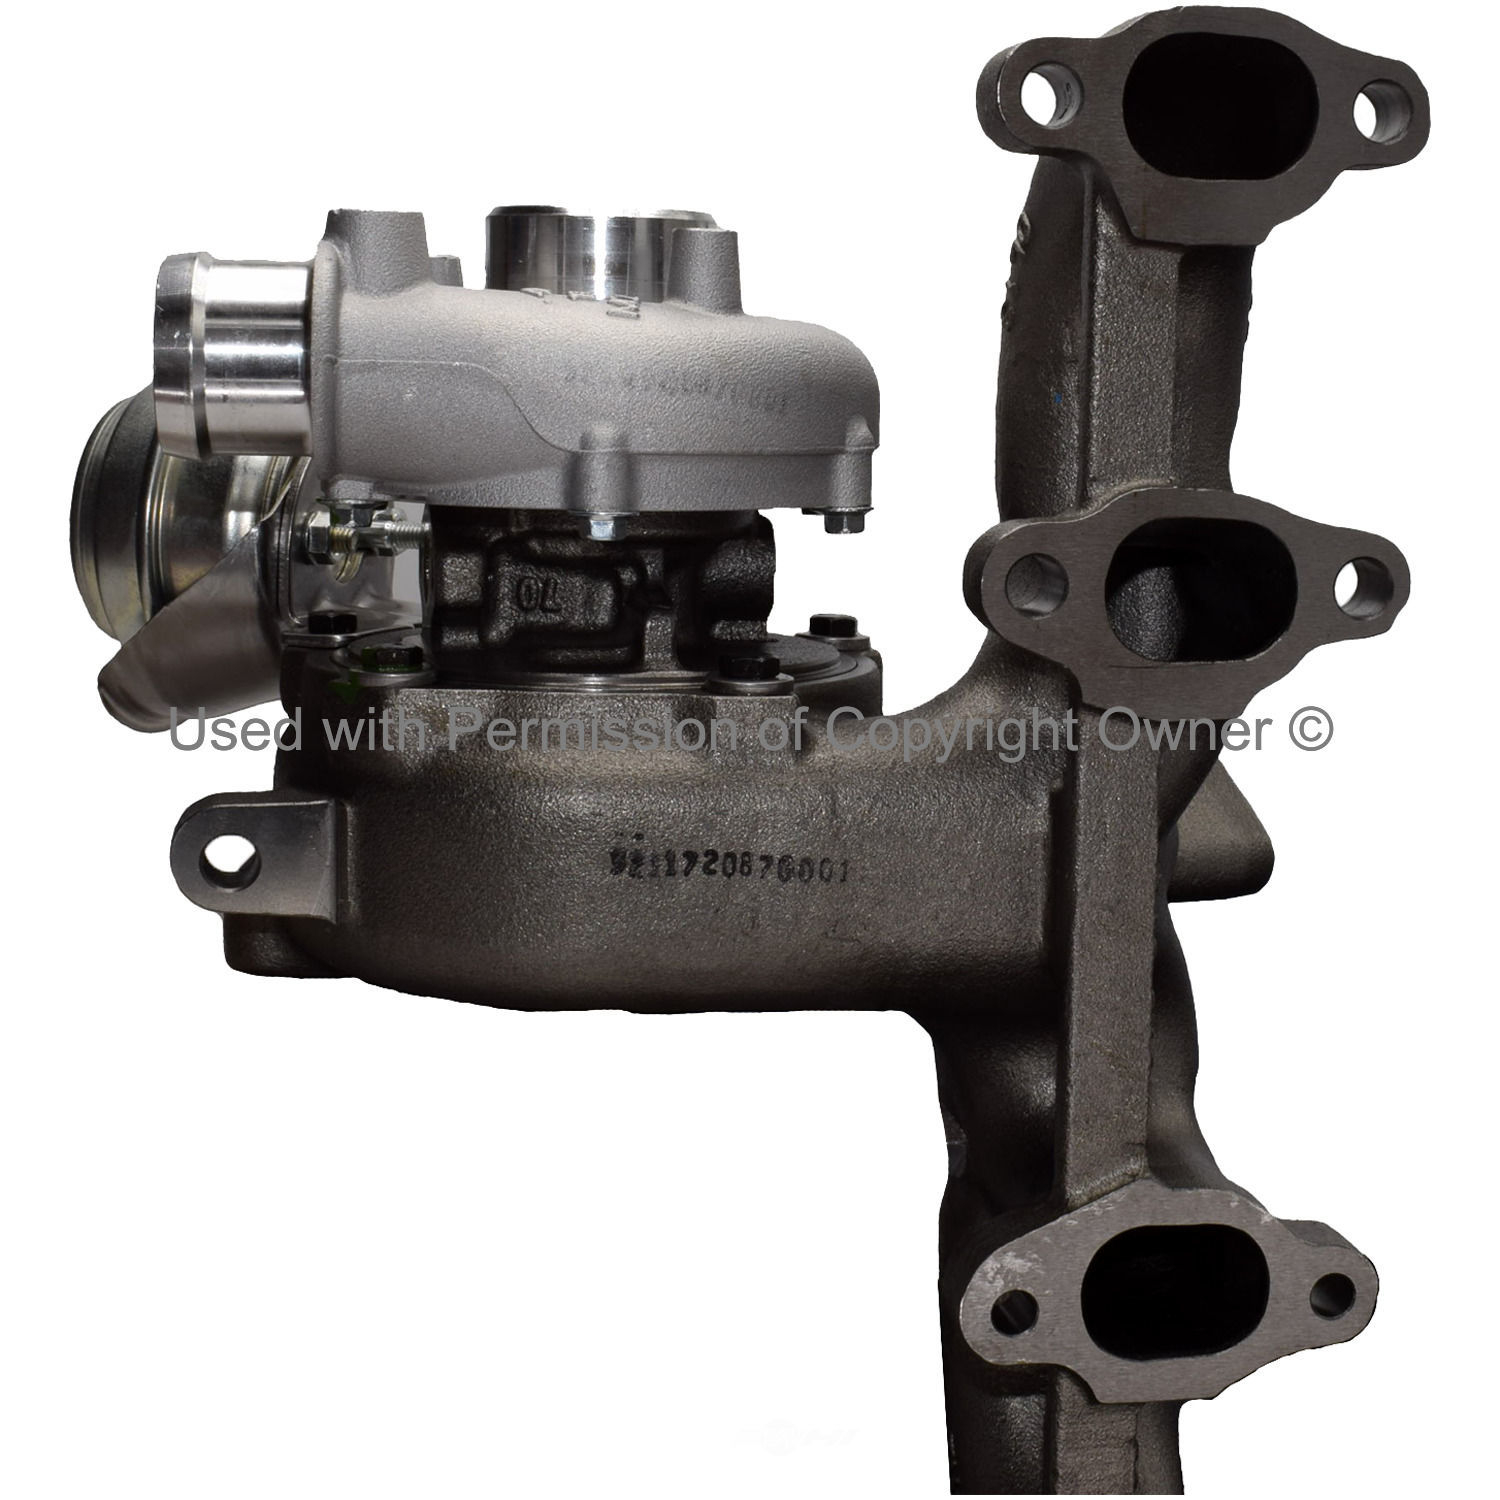 PURE ENERGY - Reman Turbocharger - PGY T2087